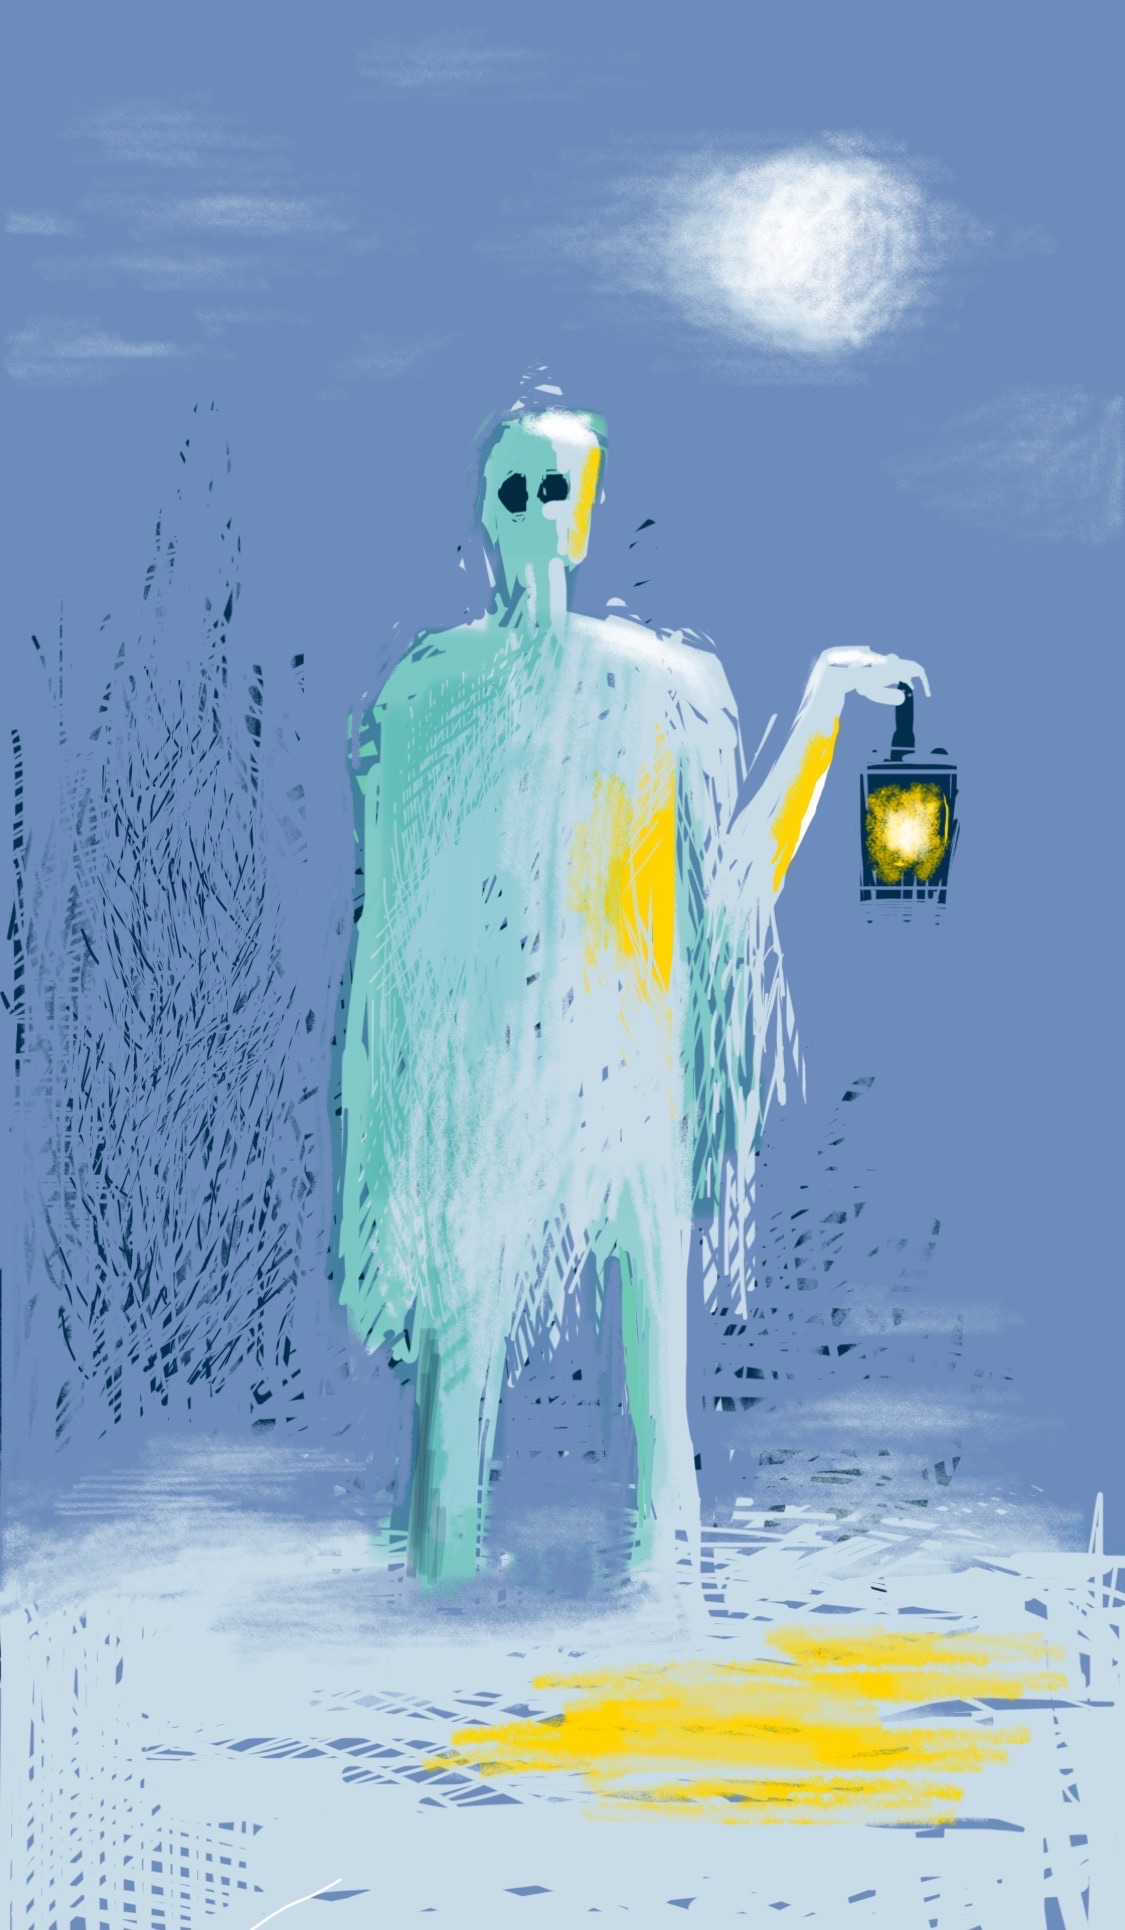 An eerie figure walking through the snow at night, holding a lantern